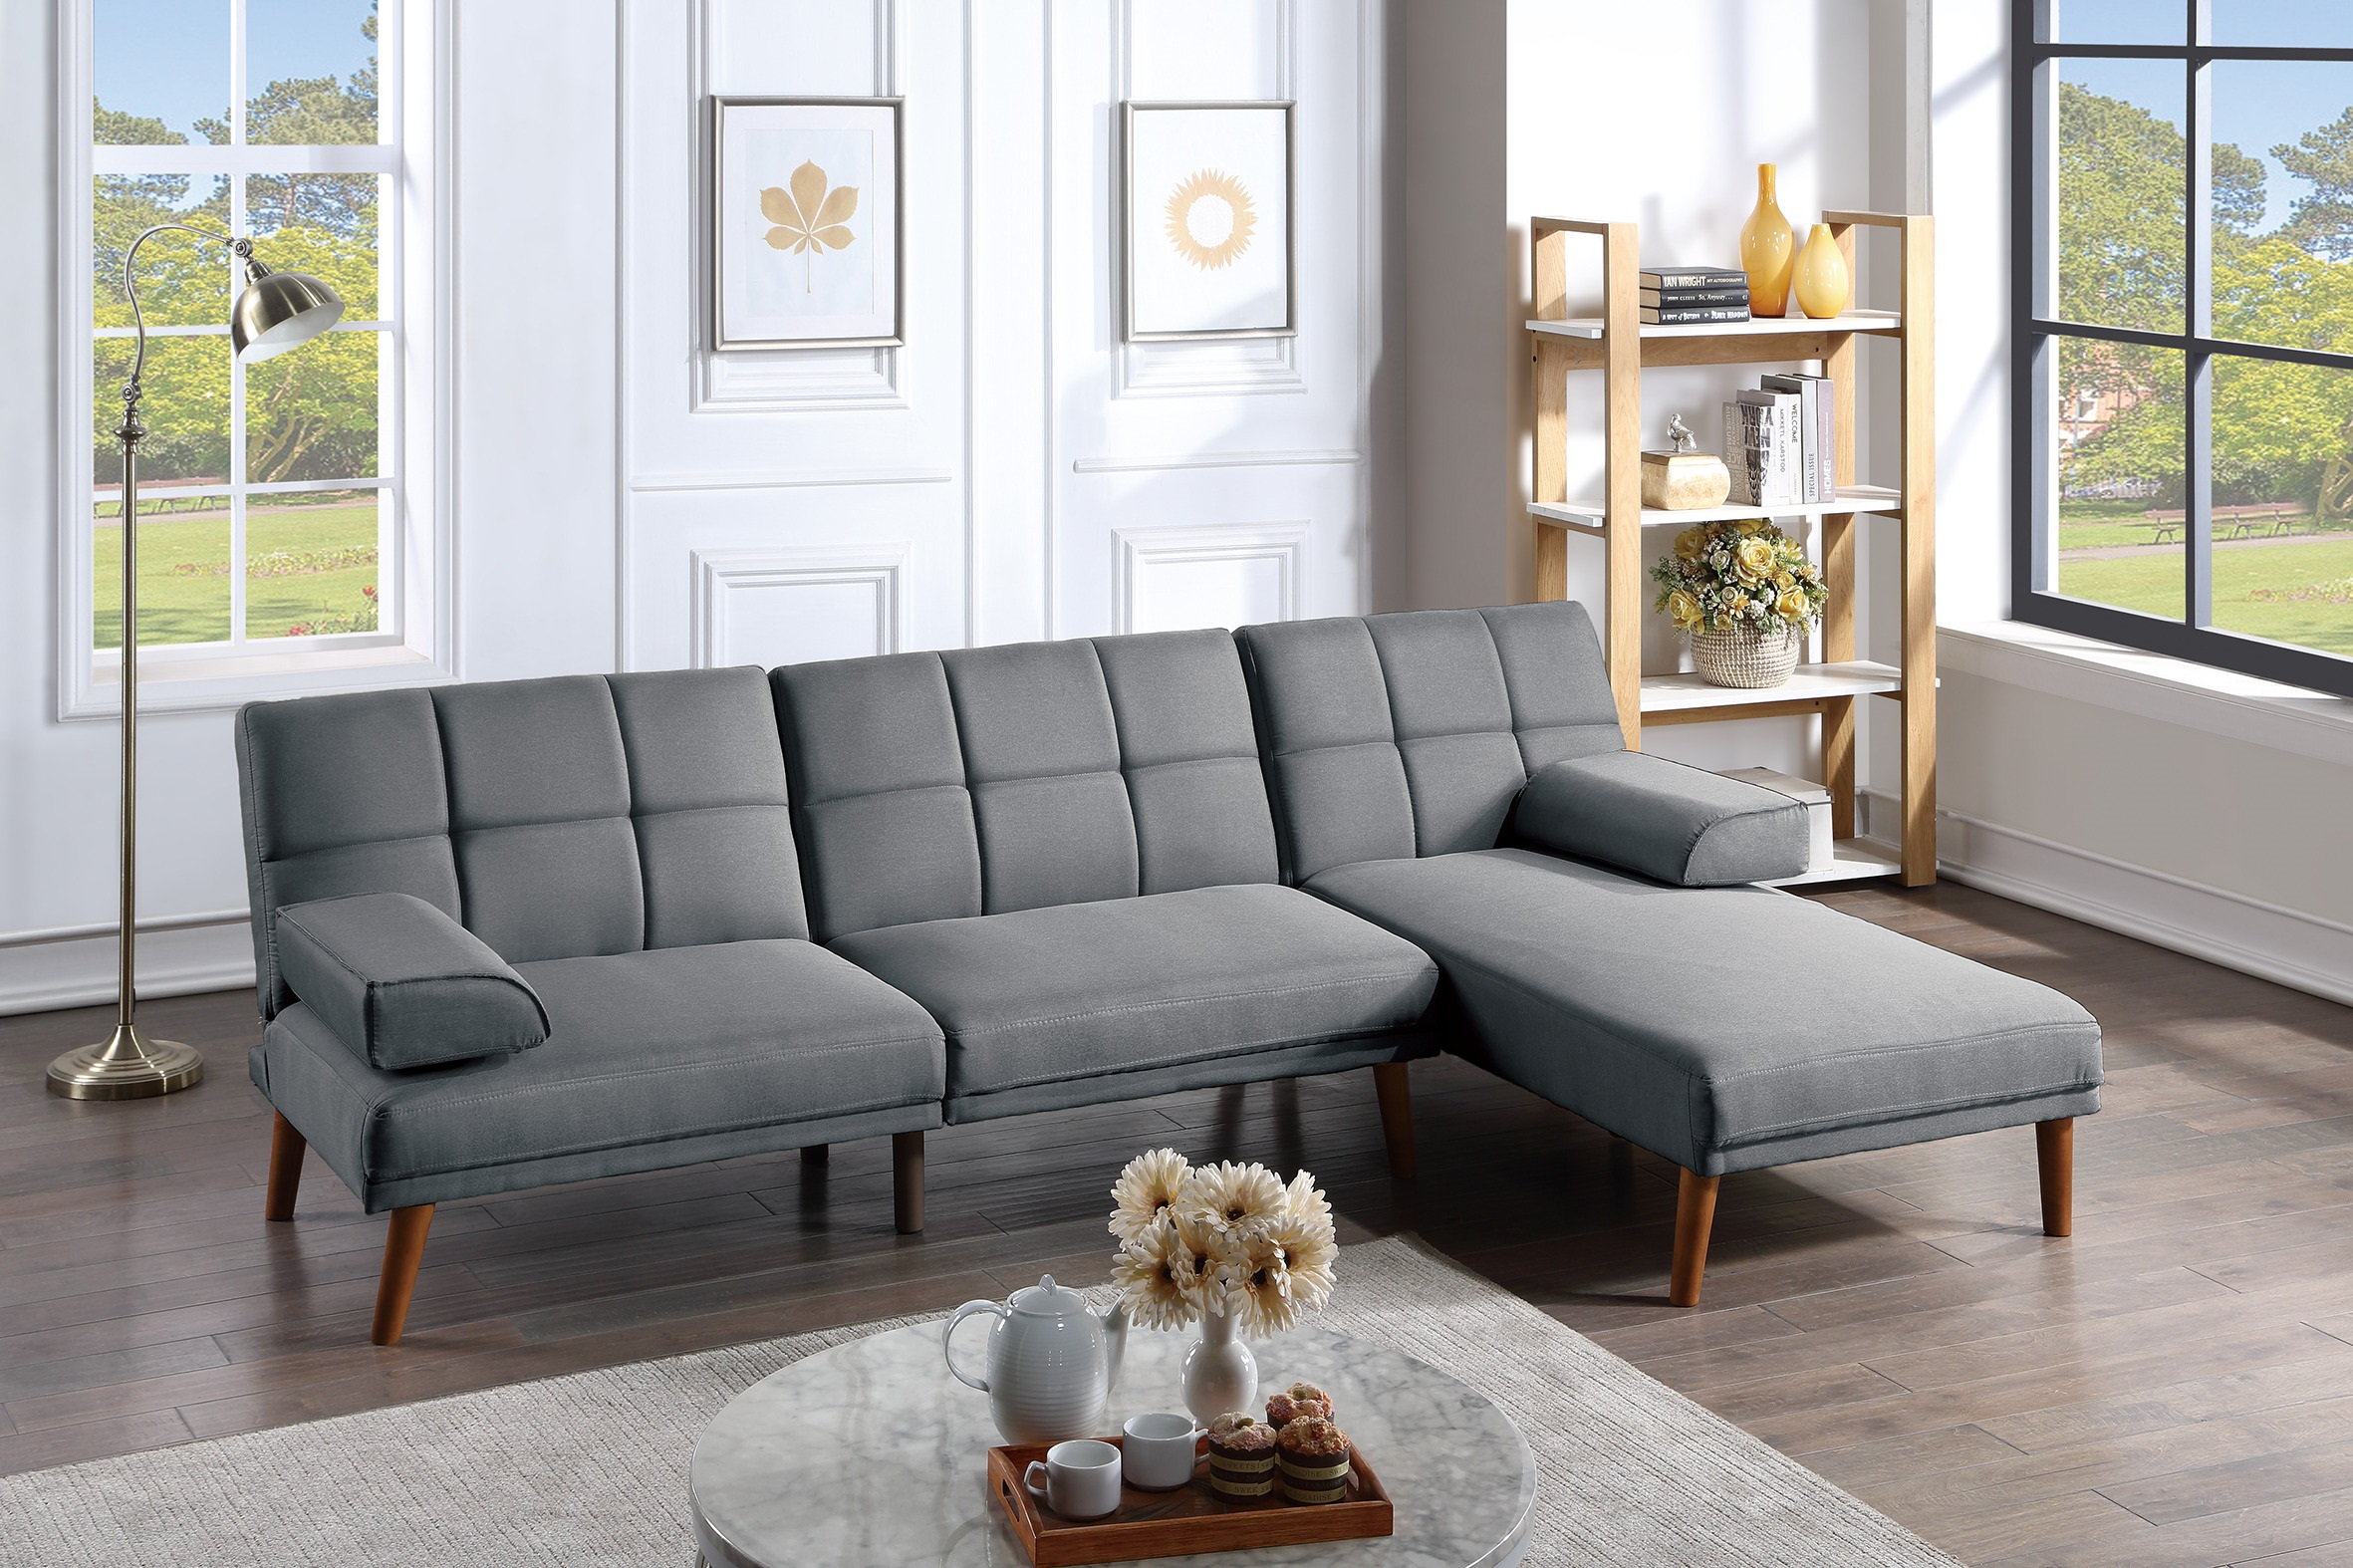 Blue Grey Color Polyfiber Sectional Sofa Set Living Room Furniture Solid wood Legs Tufted Couch Adjustable Sofa Chaise-Boyel Living